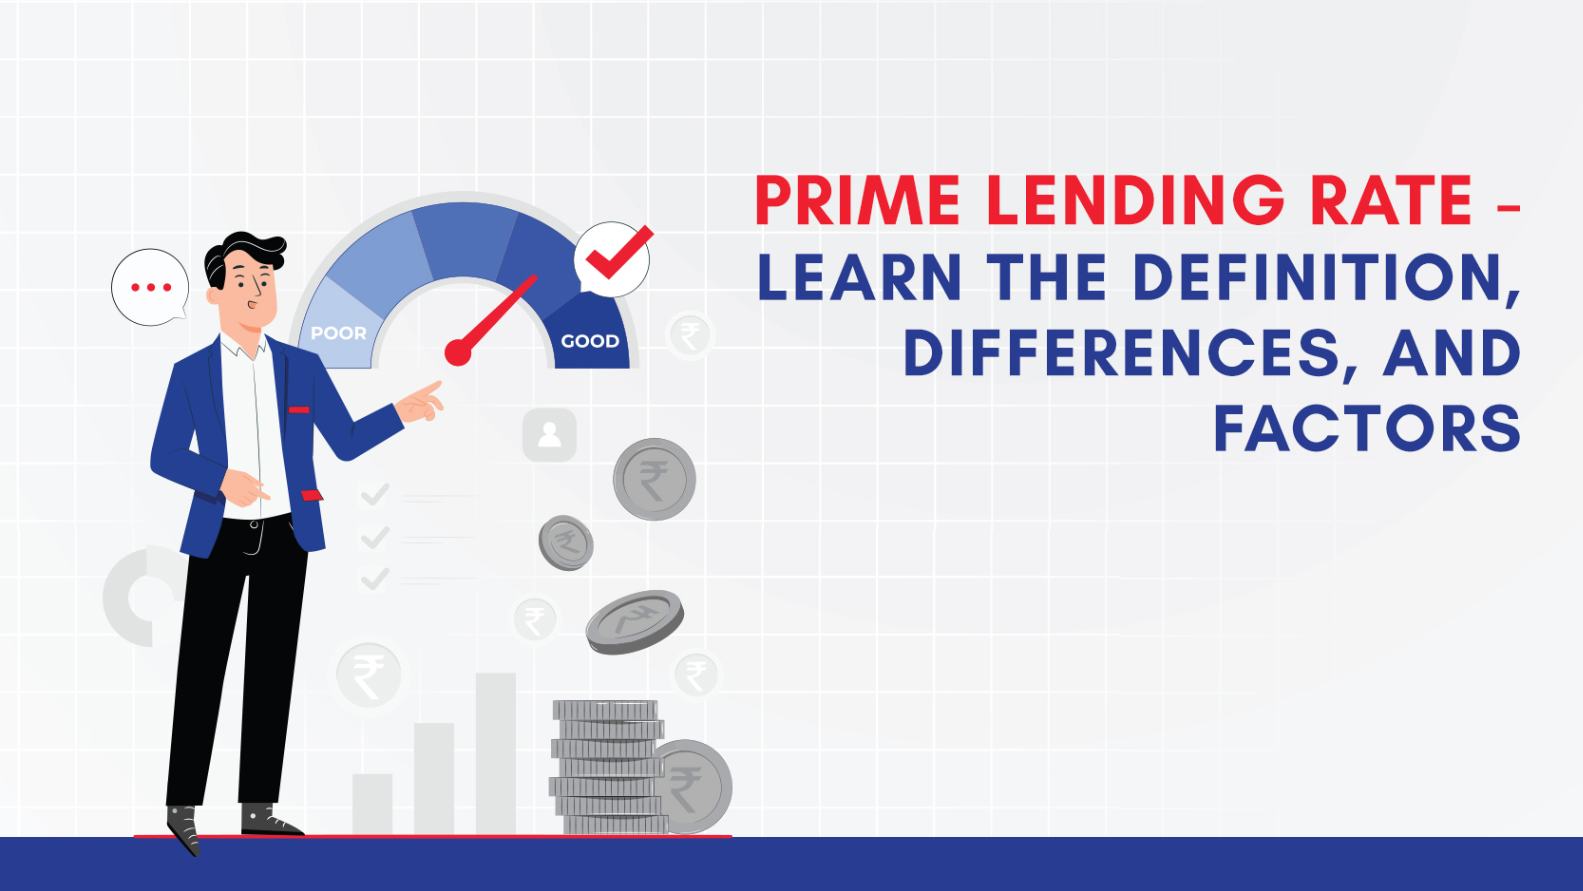 Prime Lending Rate - Learn Definition, Differences and Factors
